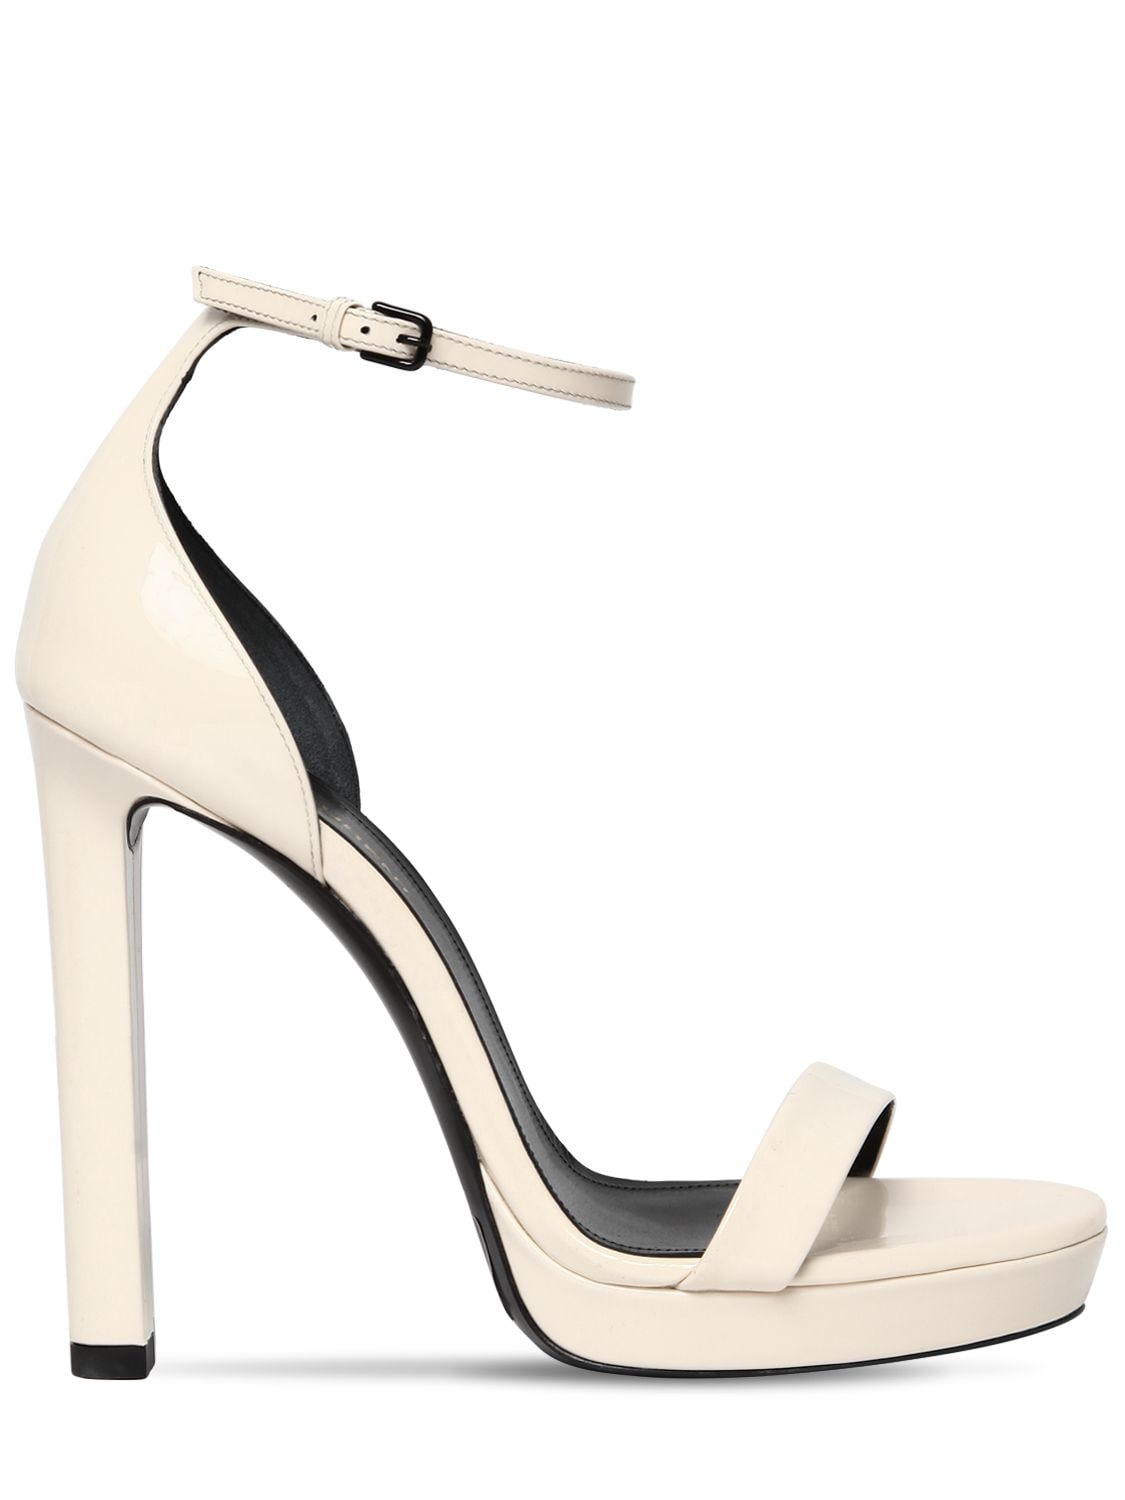 Saint Laurent 120mm Hall Patent Leather Sandals In Off White